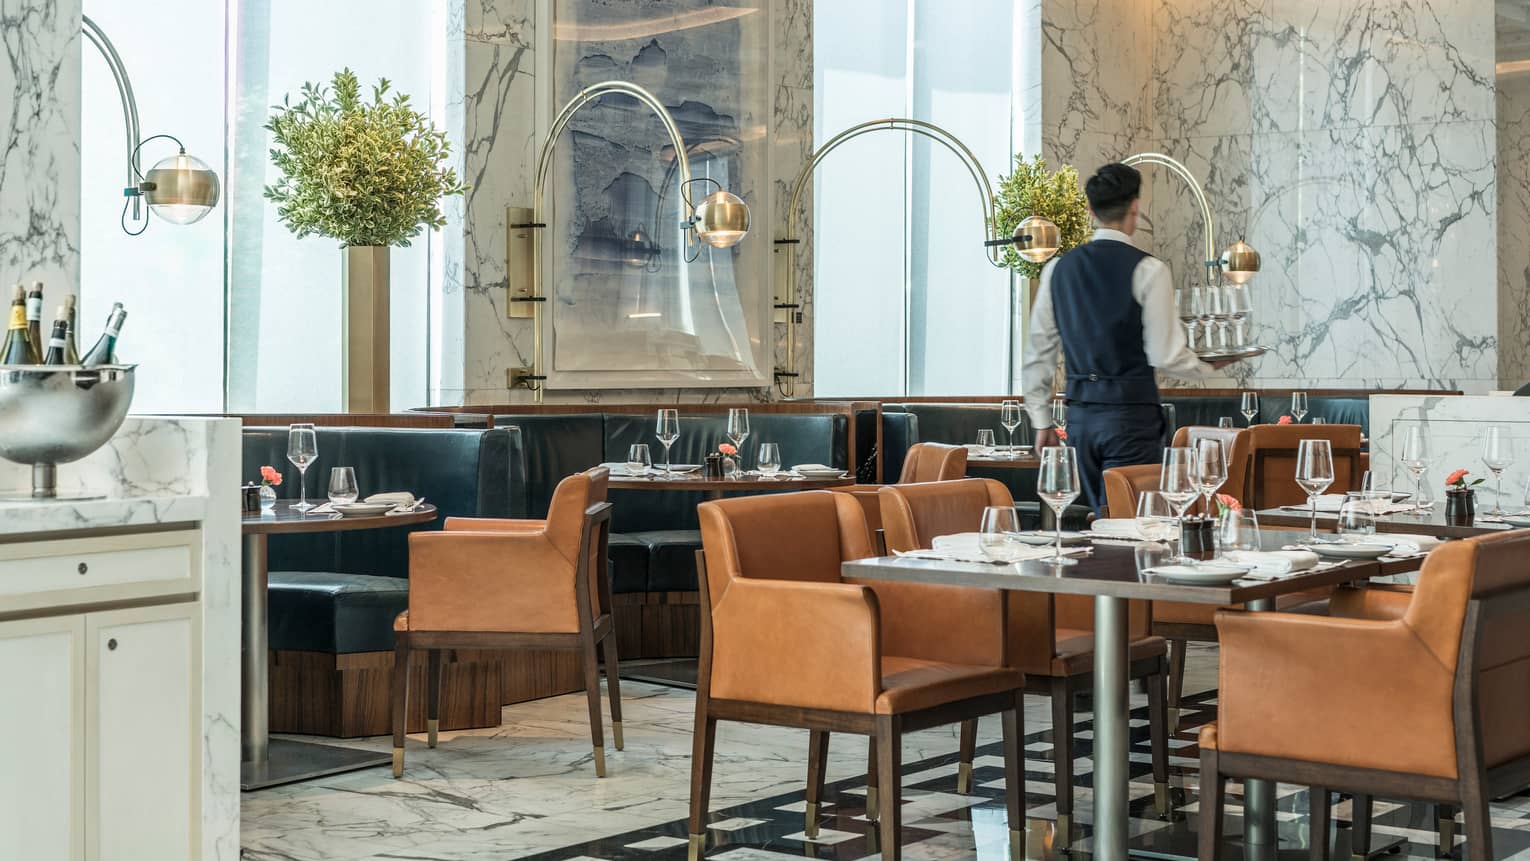 Server carries tray of glasses past lounge tables, chairs in Boccalino dining room